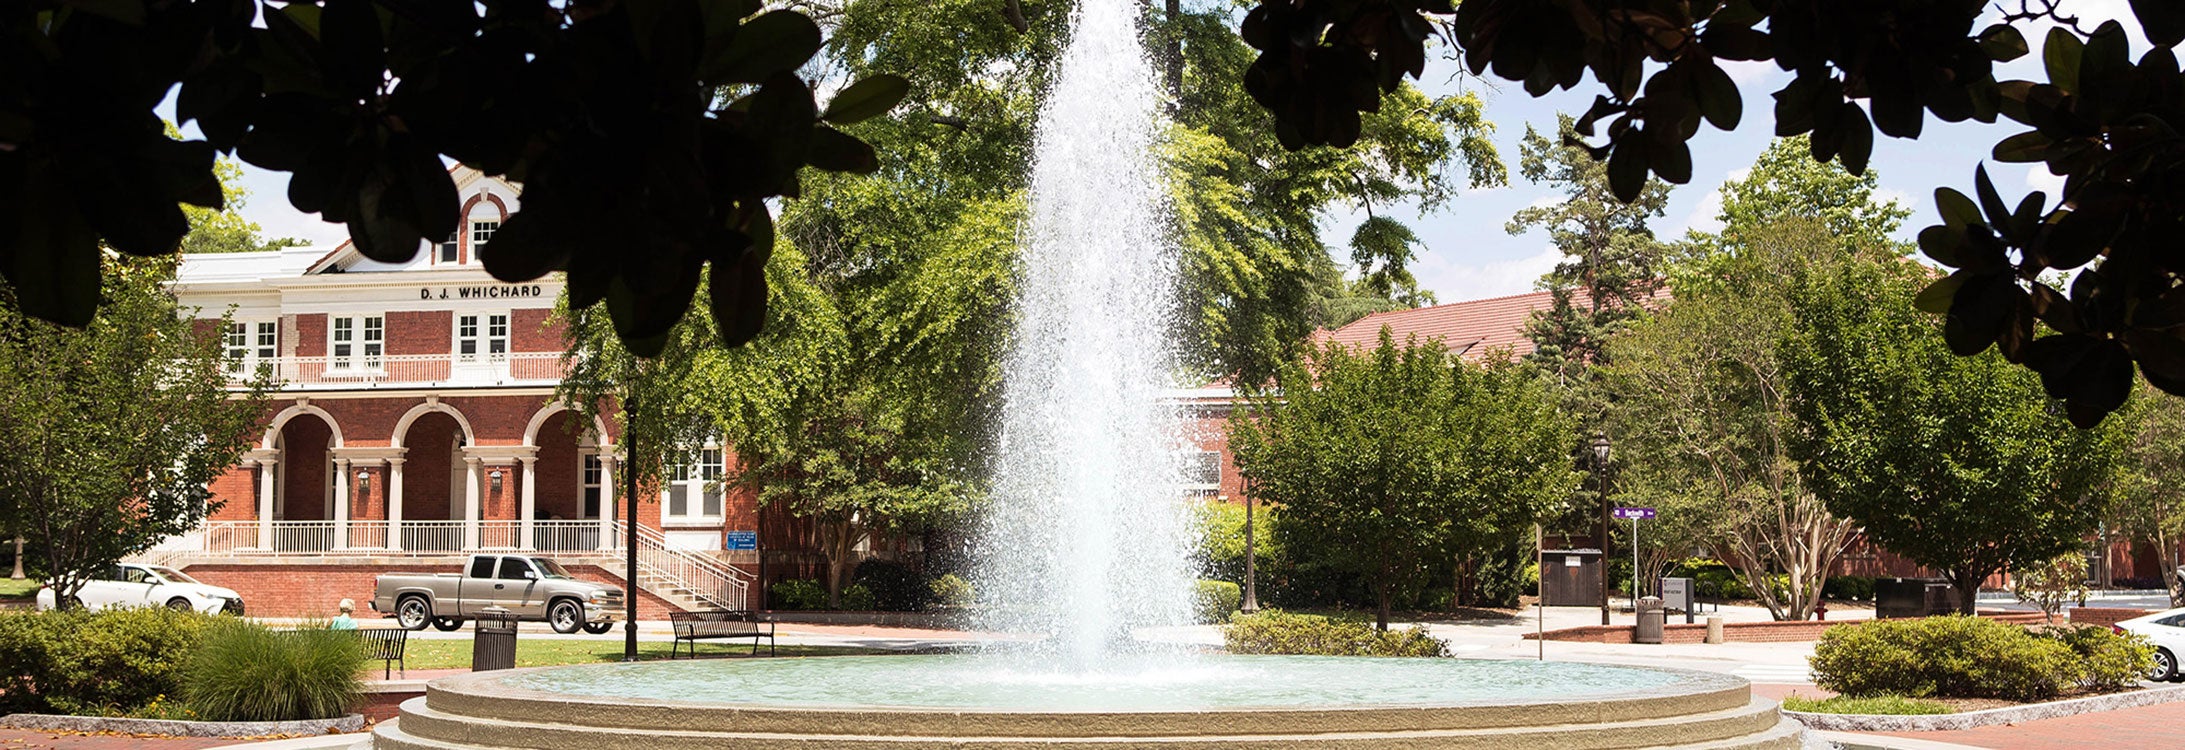 Image of fountain on main campus with Whichard building in the background